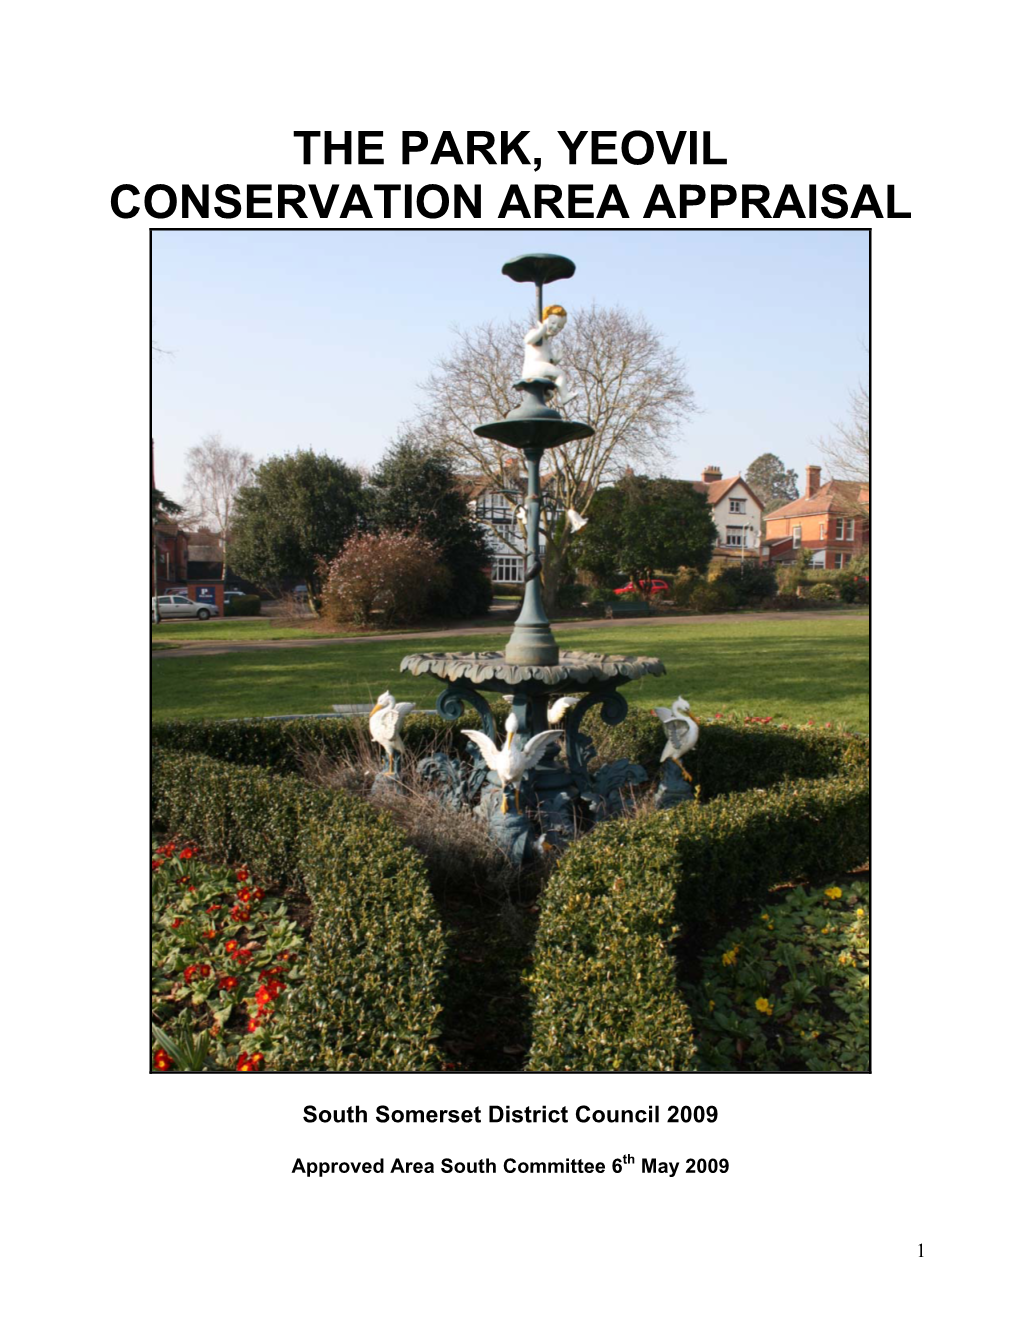 The Park (Yeovil) Conservation Area Appraisal